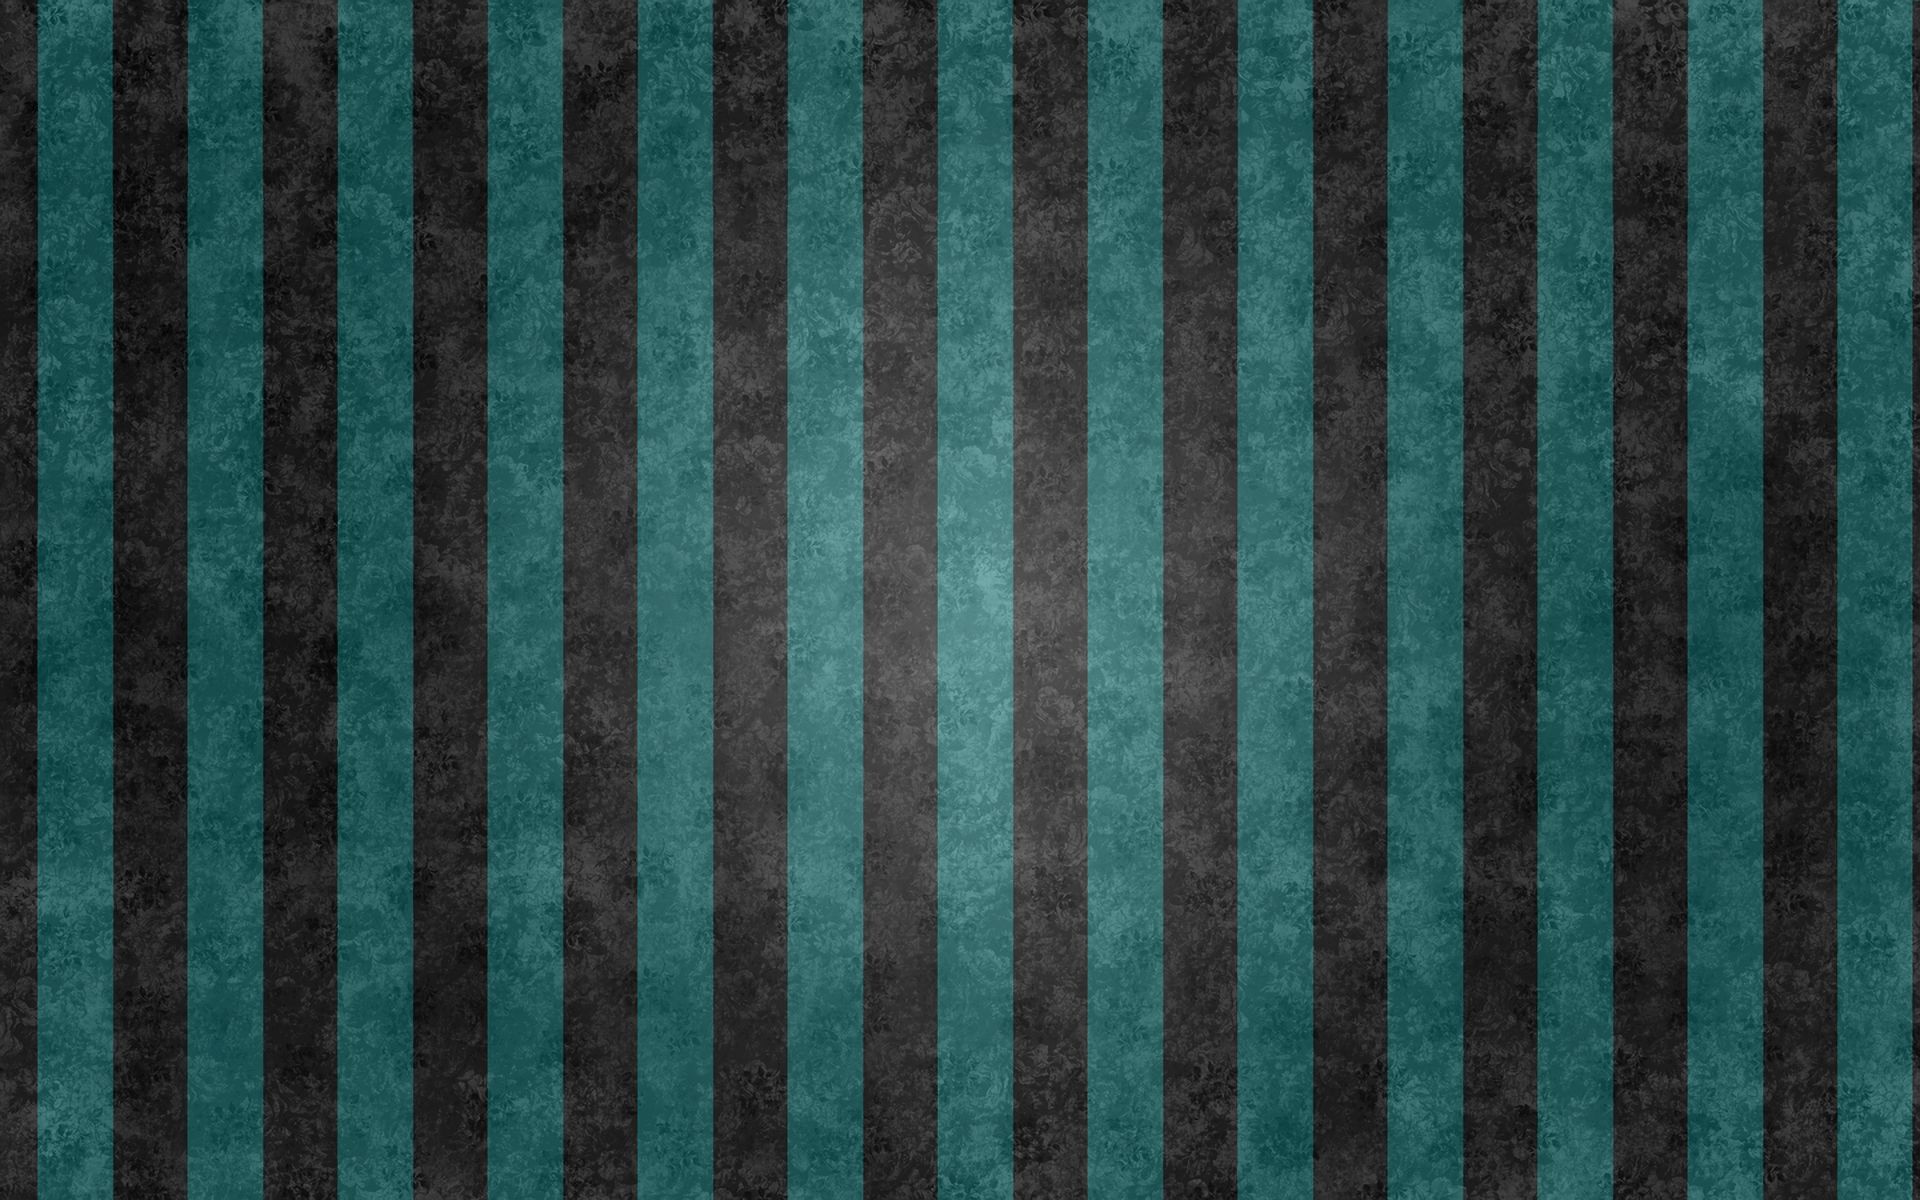 abstract Image for desktop